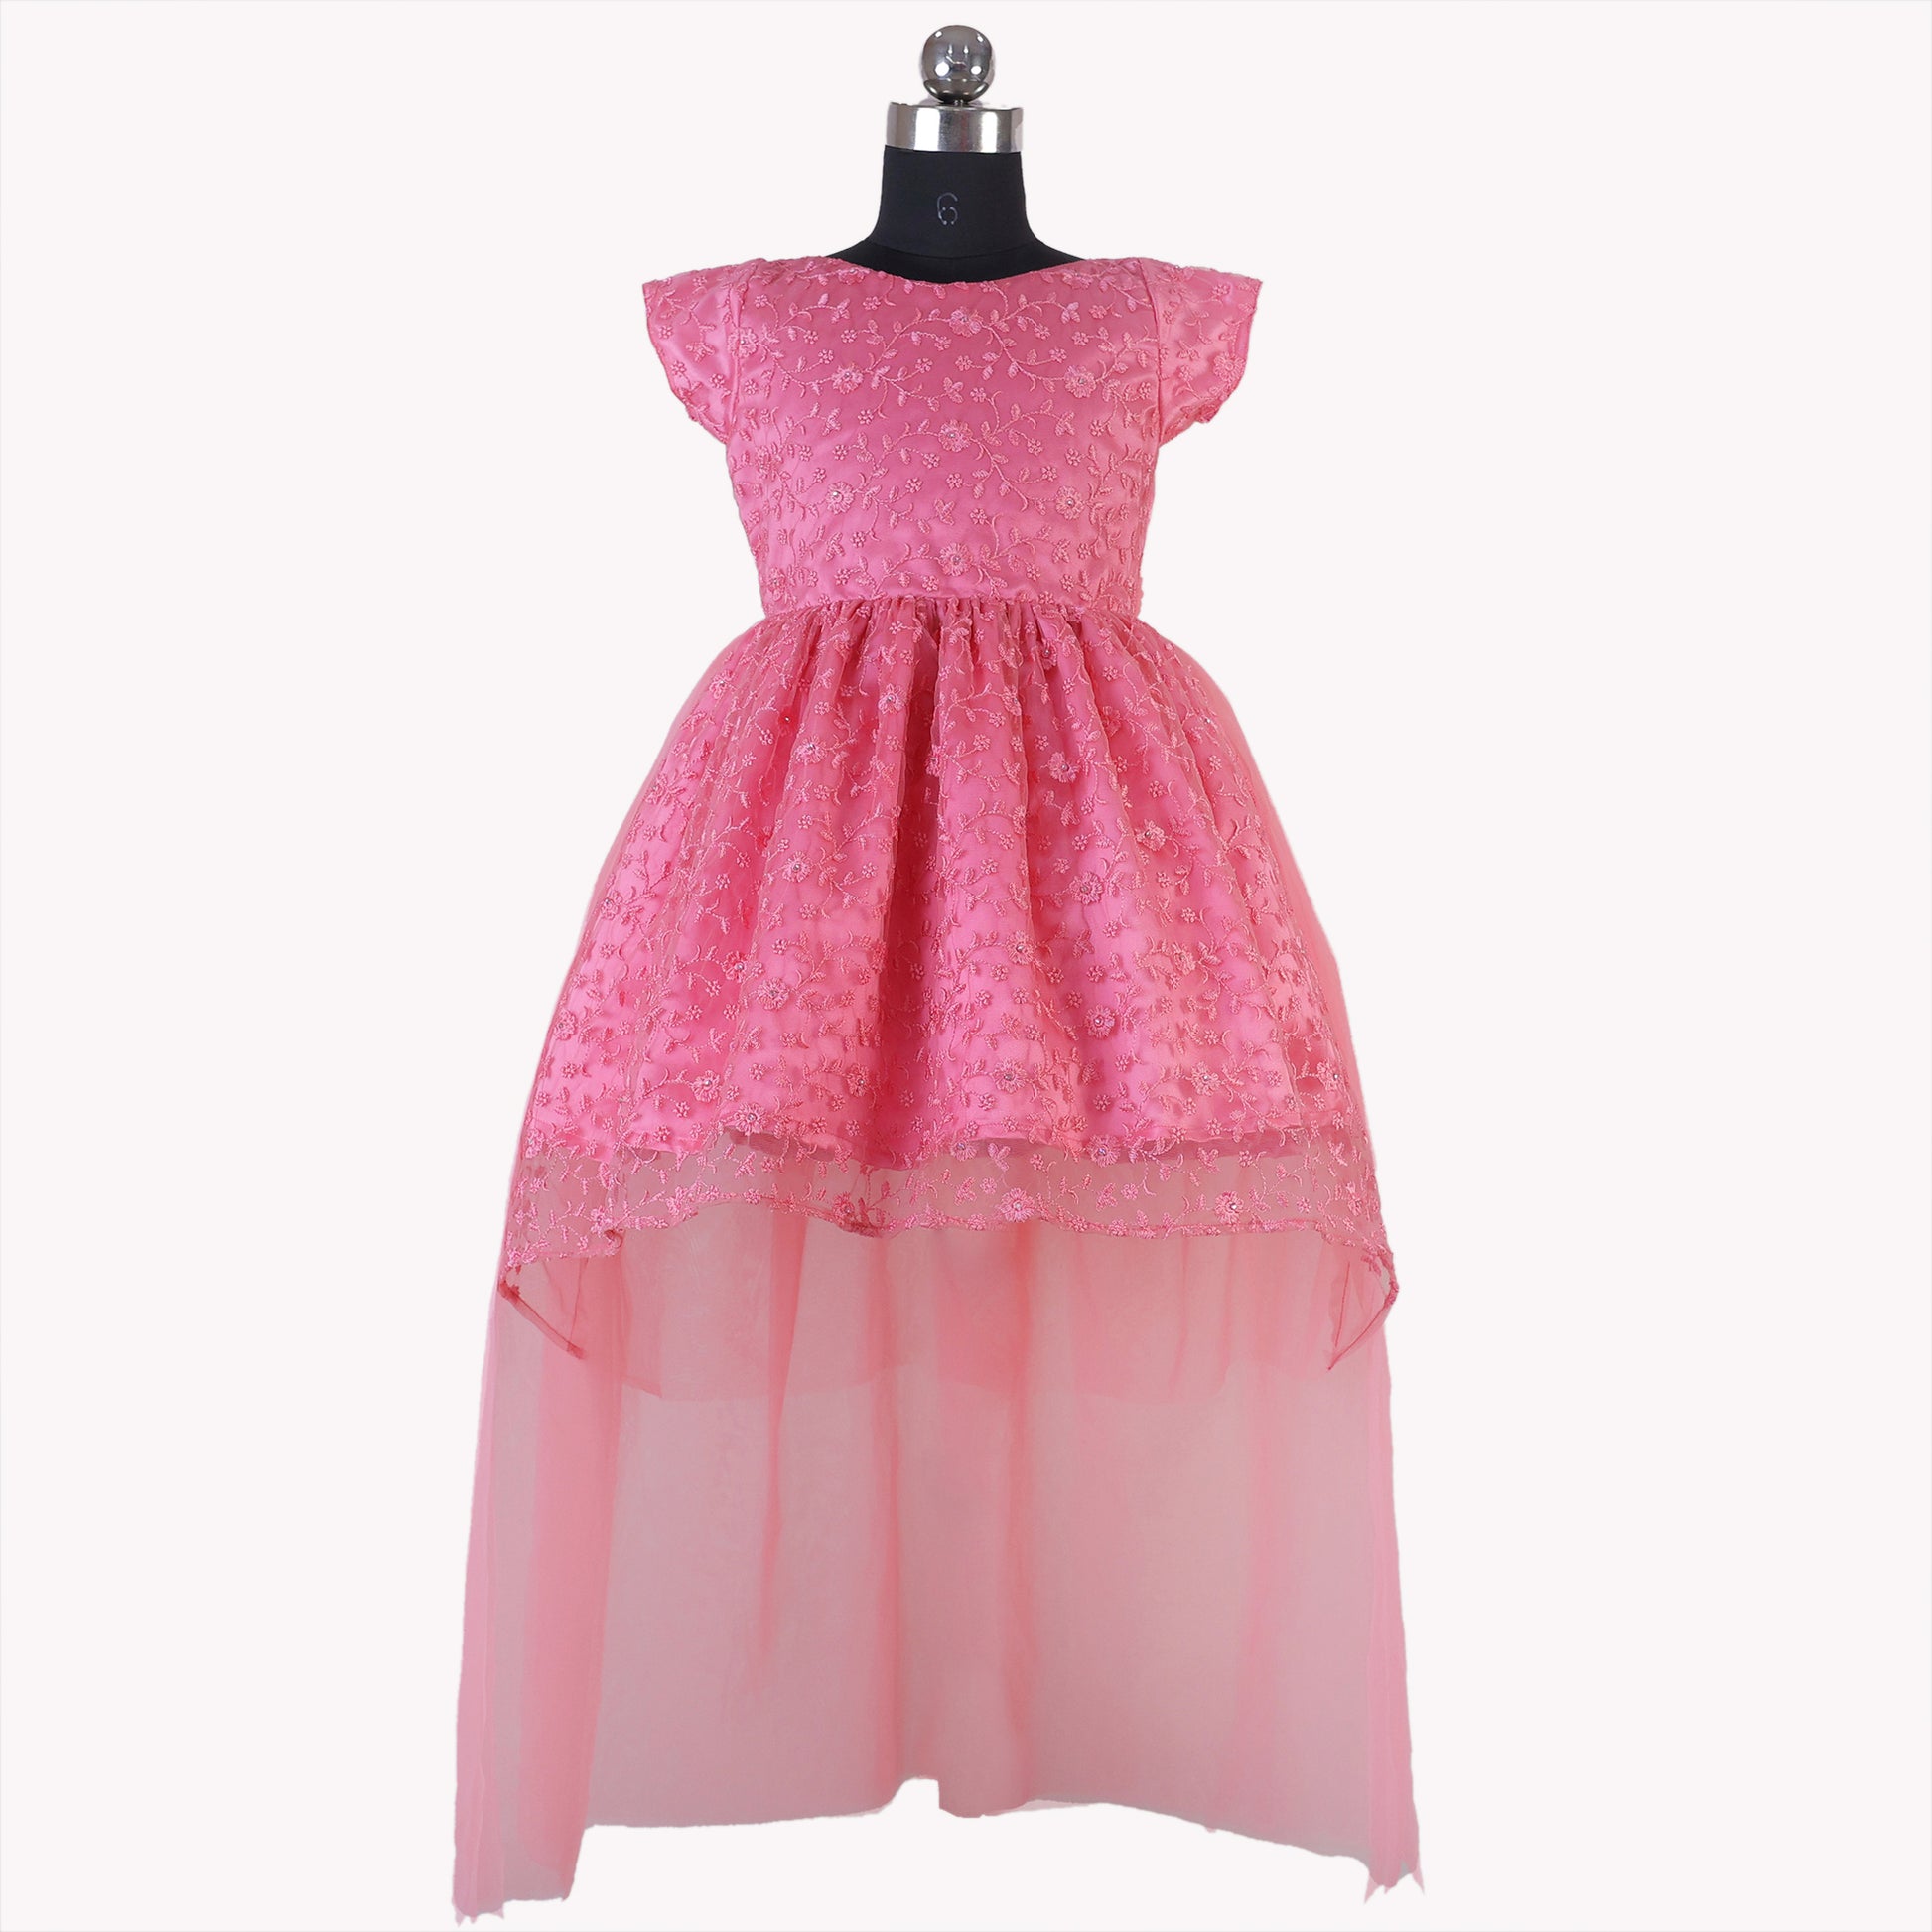 HEYKIDOO new design party wear dress latest designer kids girls clothing stylish comfortable party frock 2023 floral embroidered high low style satin pink birthday party dress online shopping India